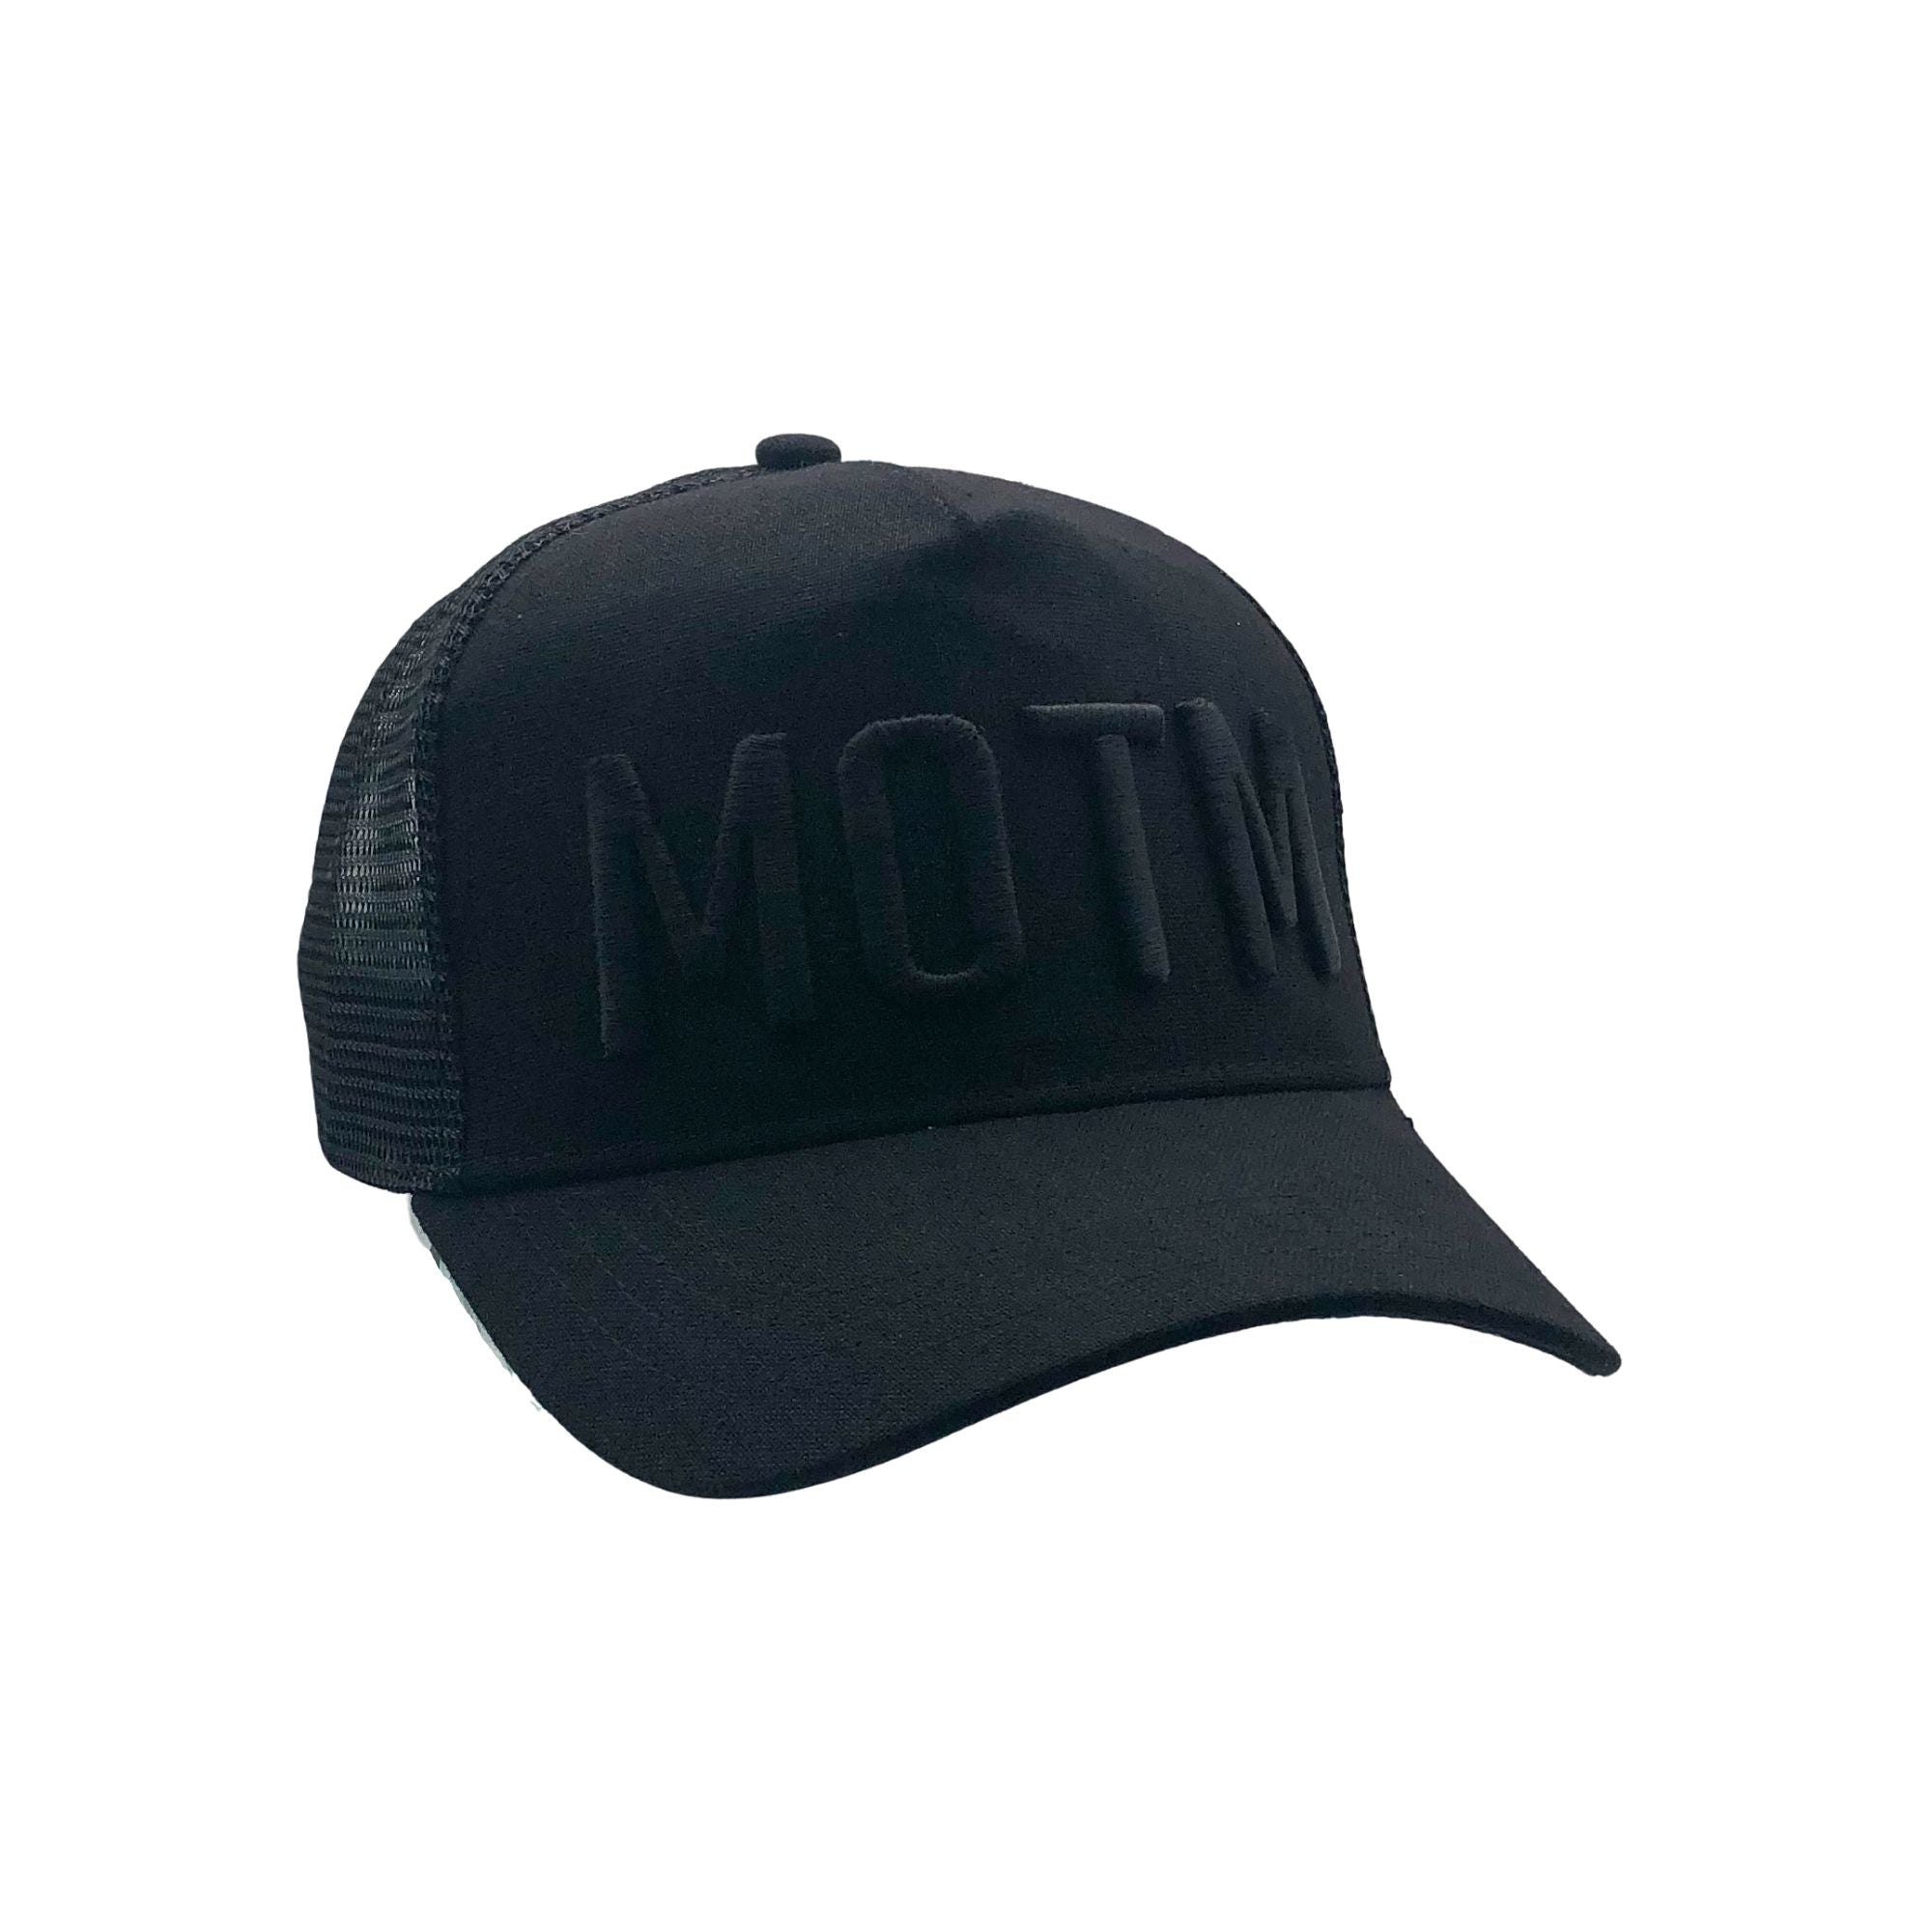 MAN OF THE 3D Carlos - Roberto MATCH® MOTM Cap Embroidered Official Bl